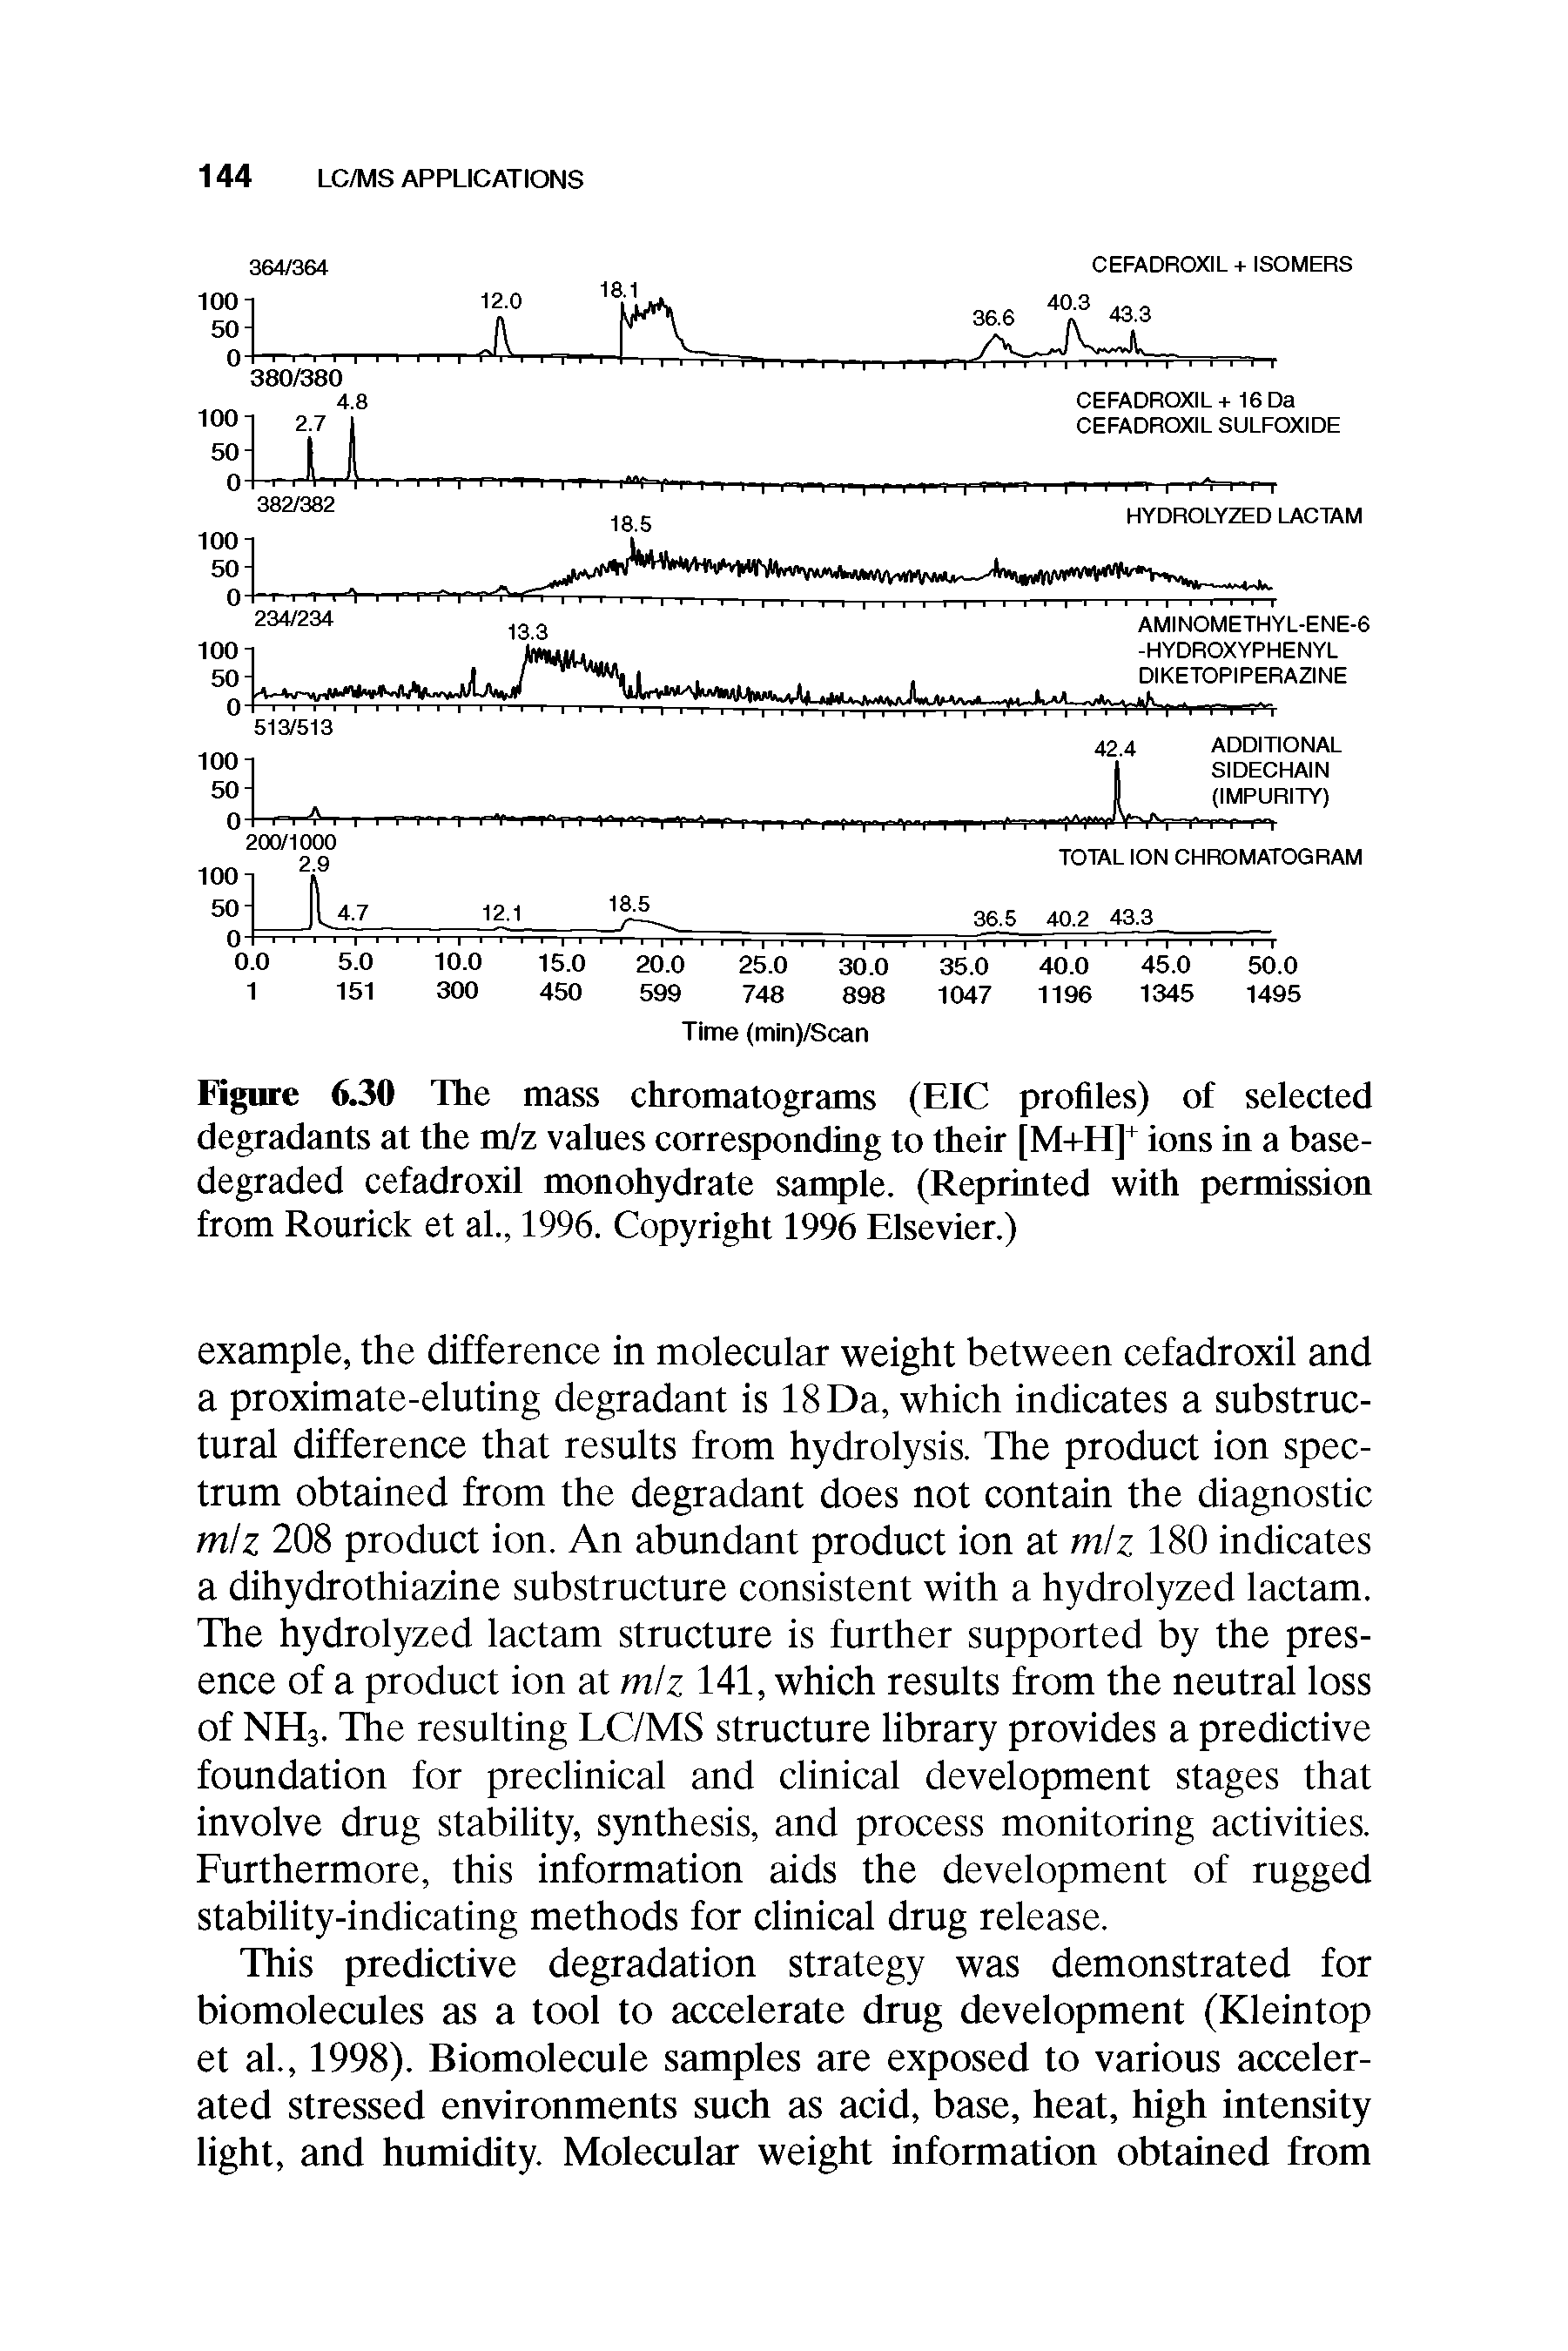 Figure 6.30 The mass chromatograms (EIC profiles) of selected degradants at the m/z values corresponding to their [M+H]+ ions in a base-degraded cefadroxil monohydrate sample. (Reprinted with permission from Rourick et al., 1996. Copyright 1996 Elsevier.)...